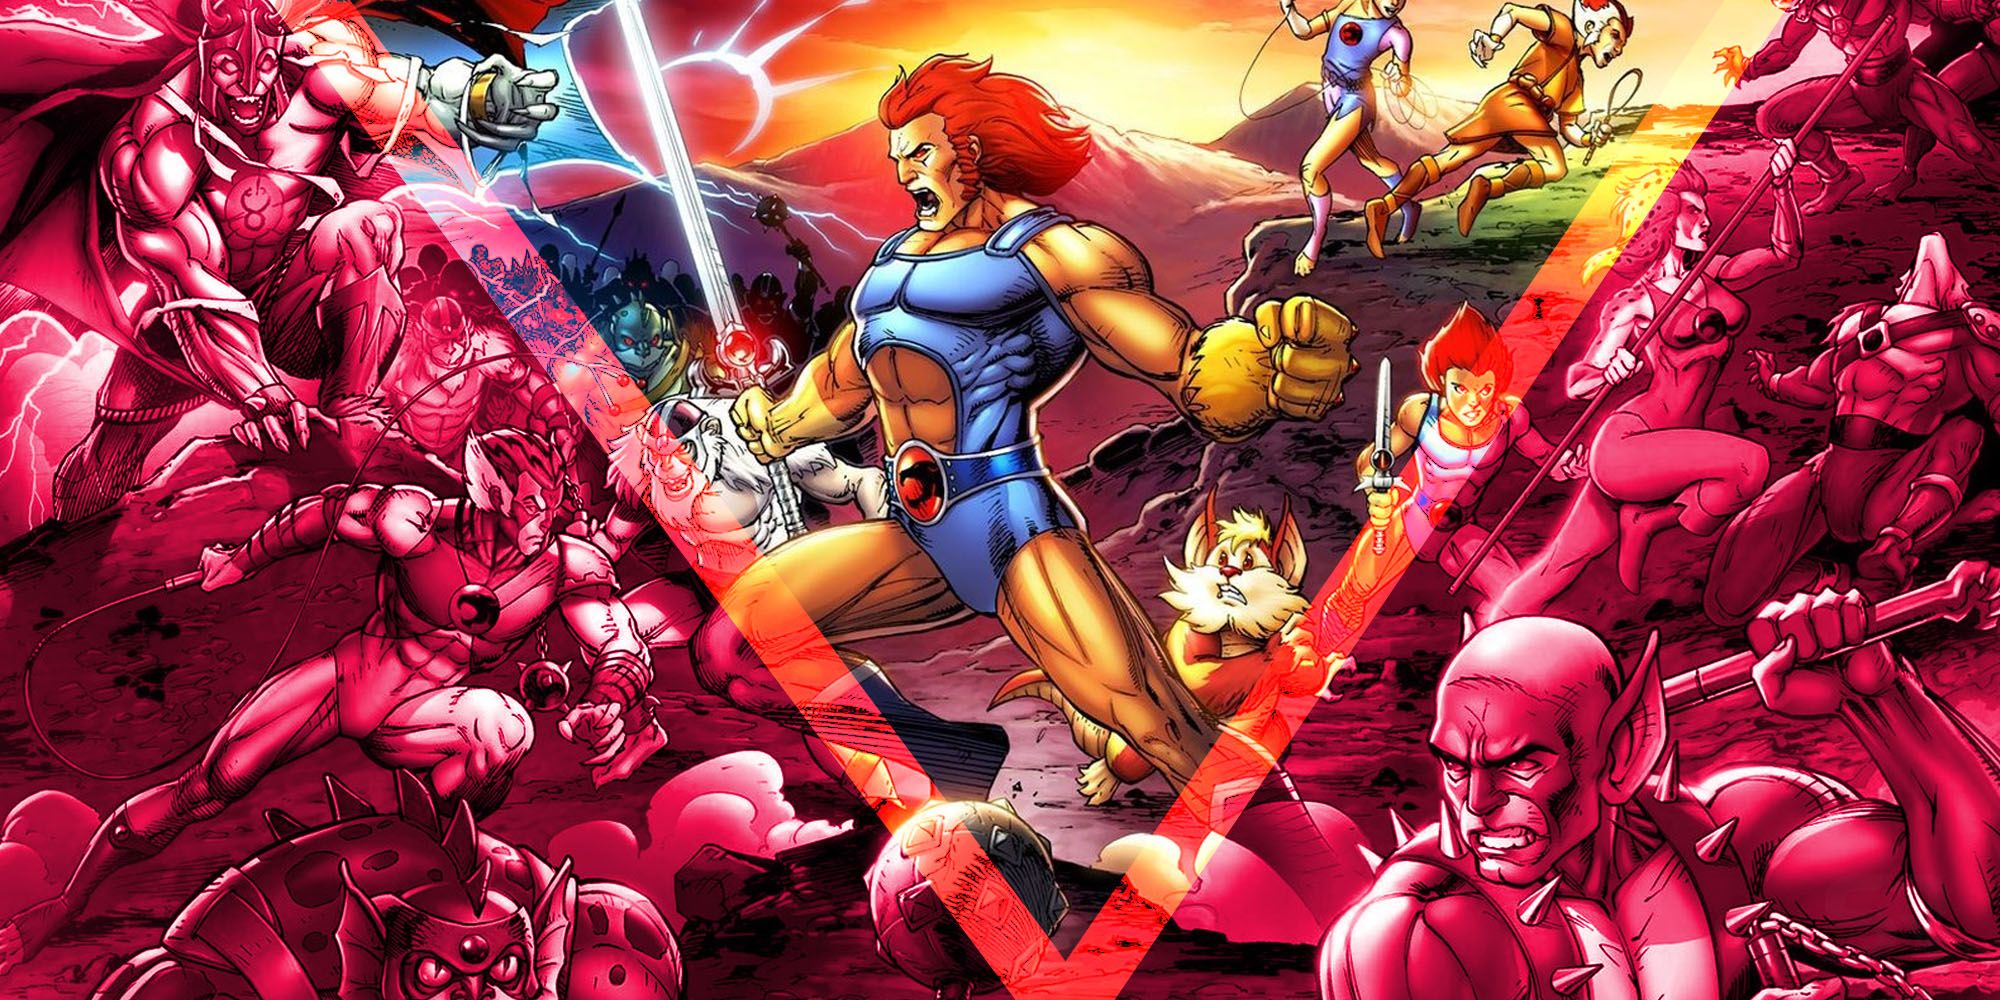 Why the cancelled Thundercats movie never happened